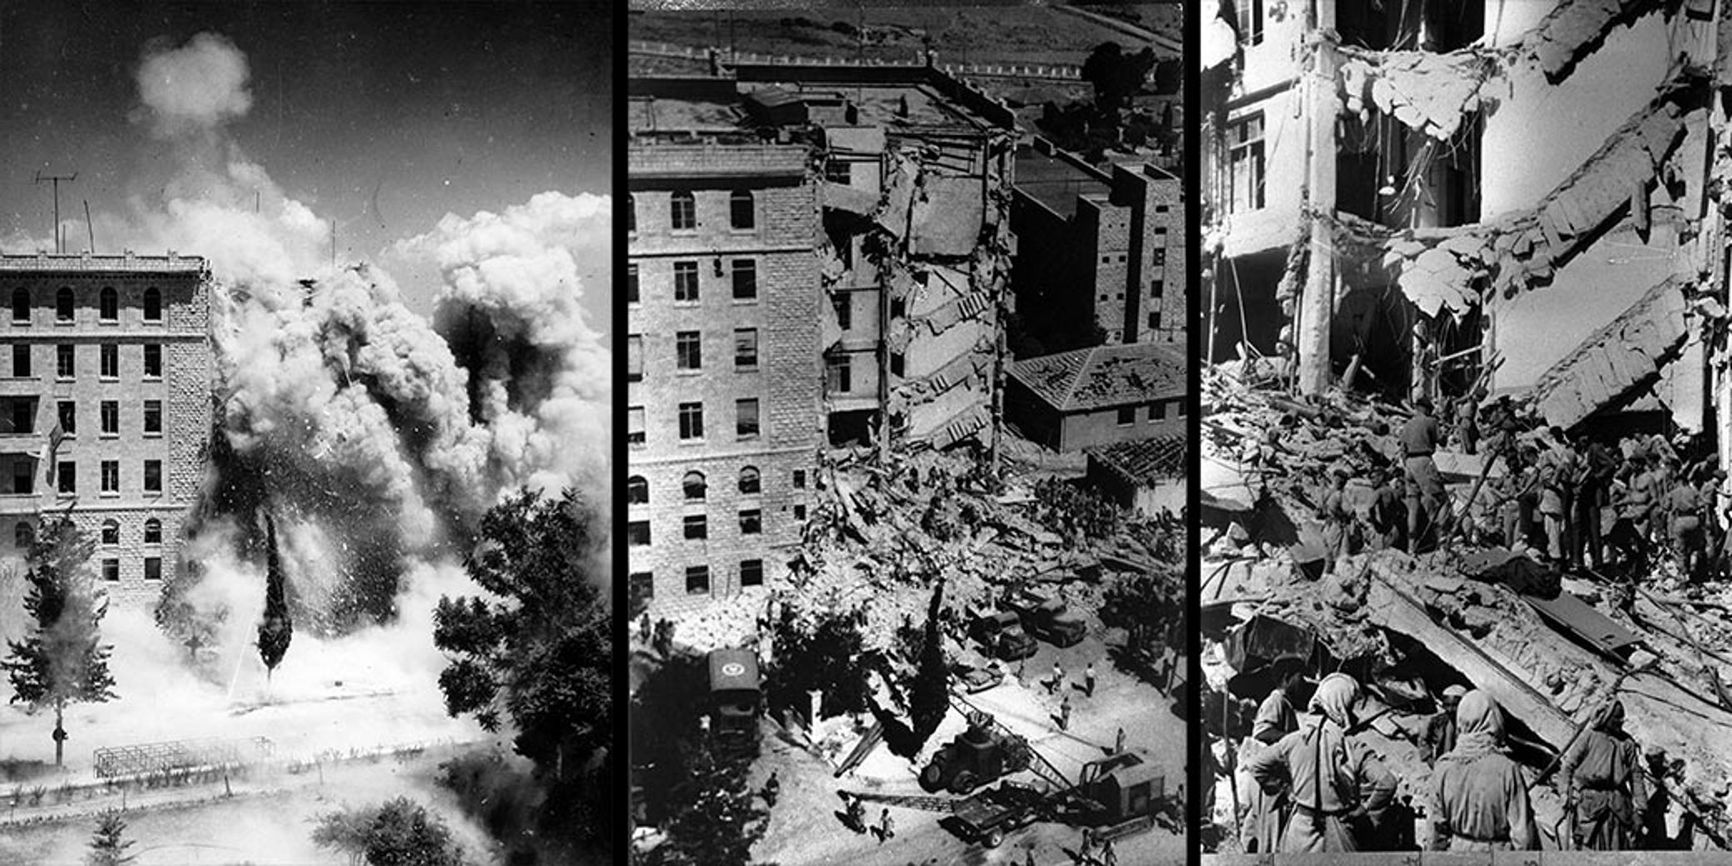 The bombing of the King David on July 22, 1946 